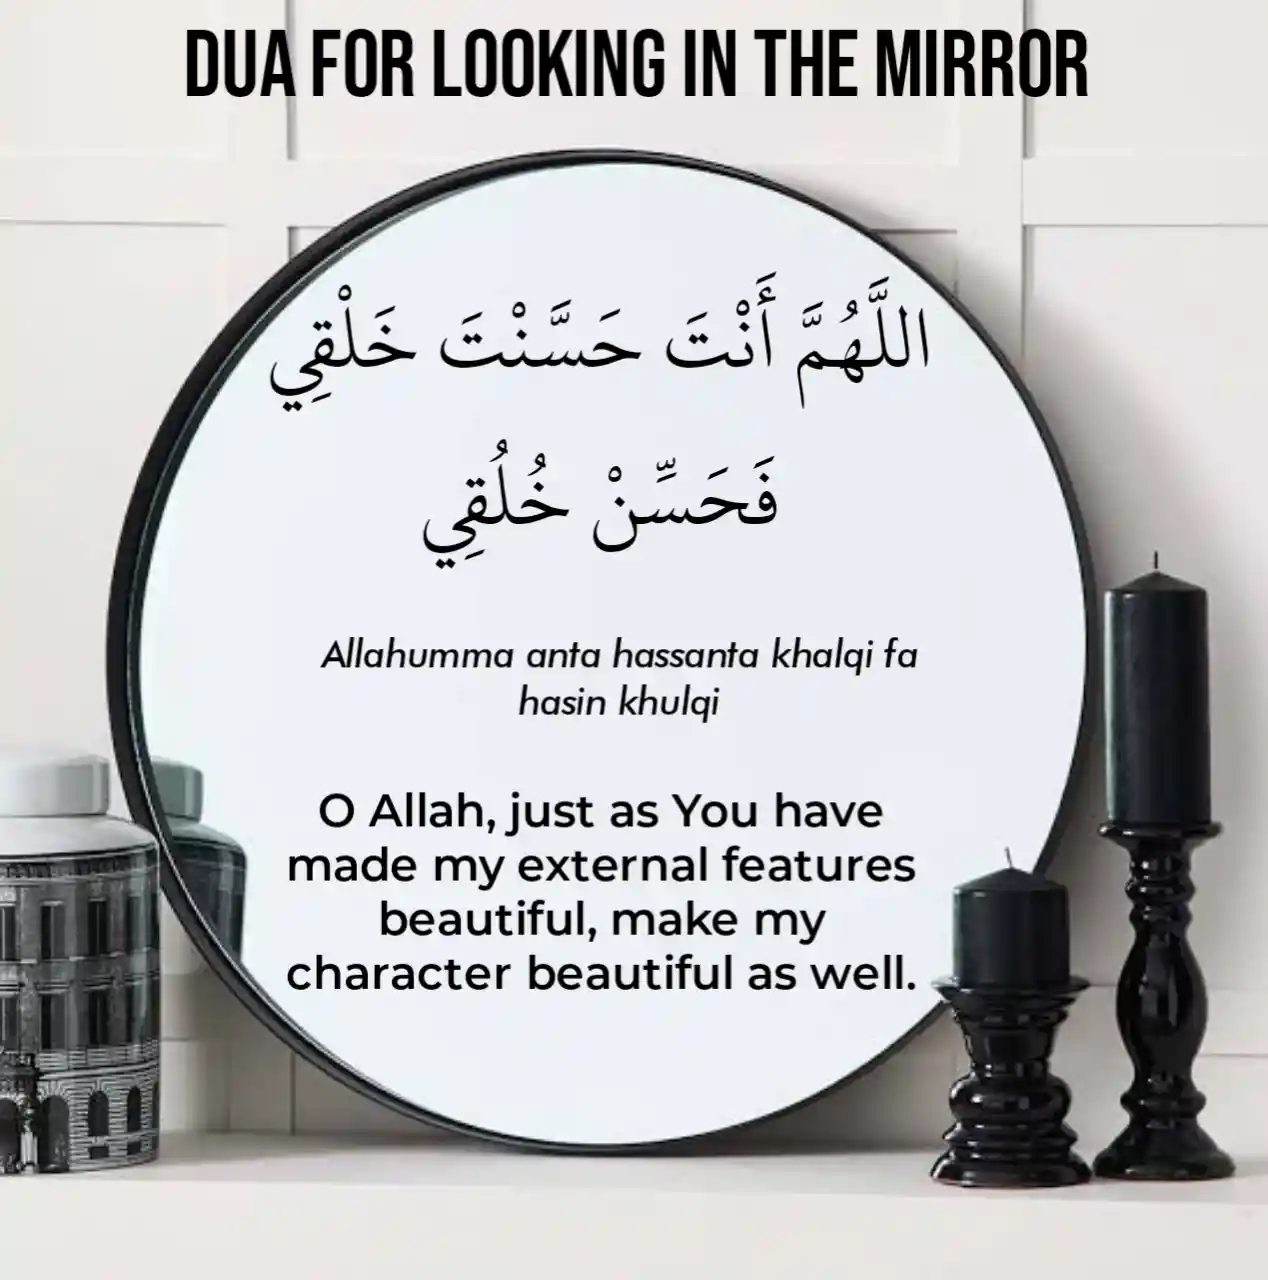 Dua For Looking in The Mirror